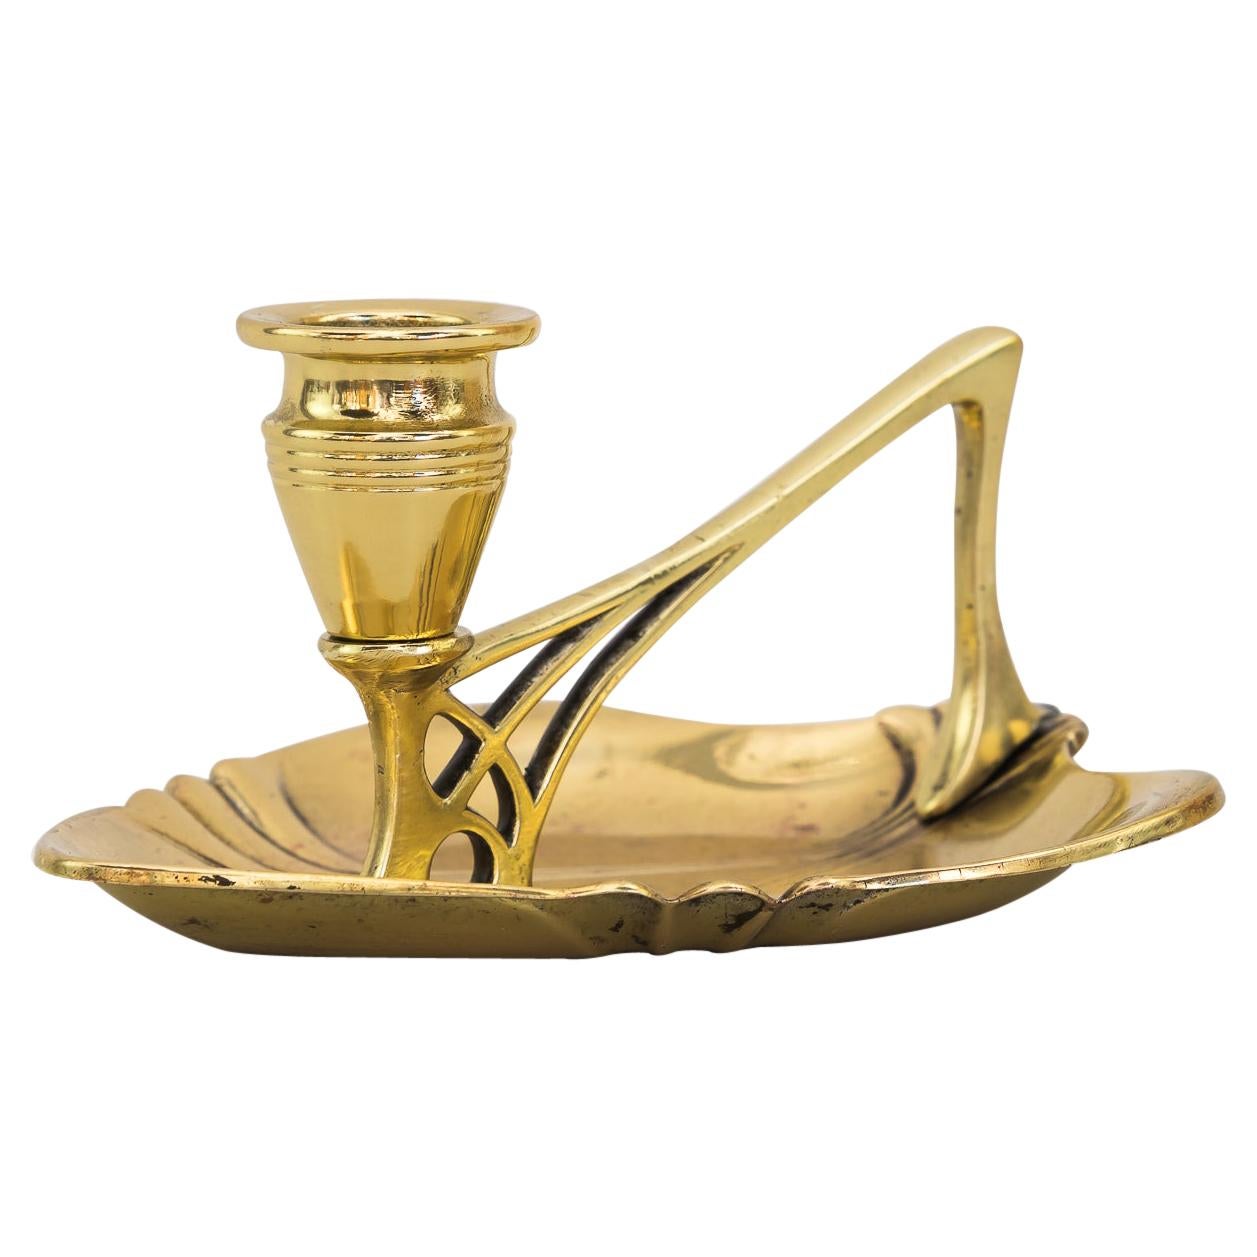 Brass Portable candle holder